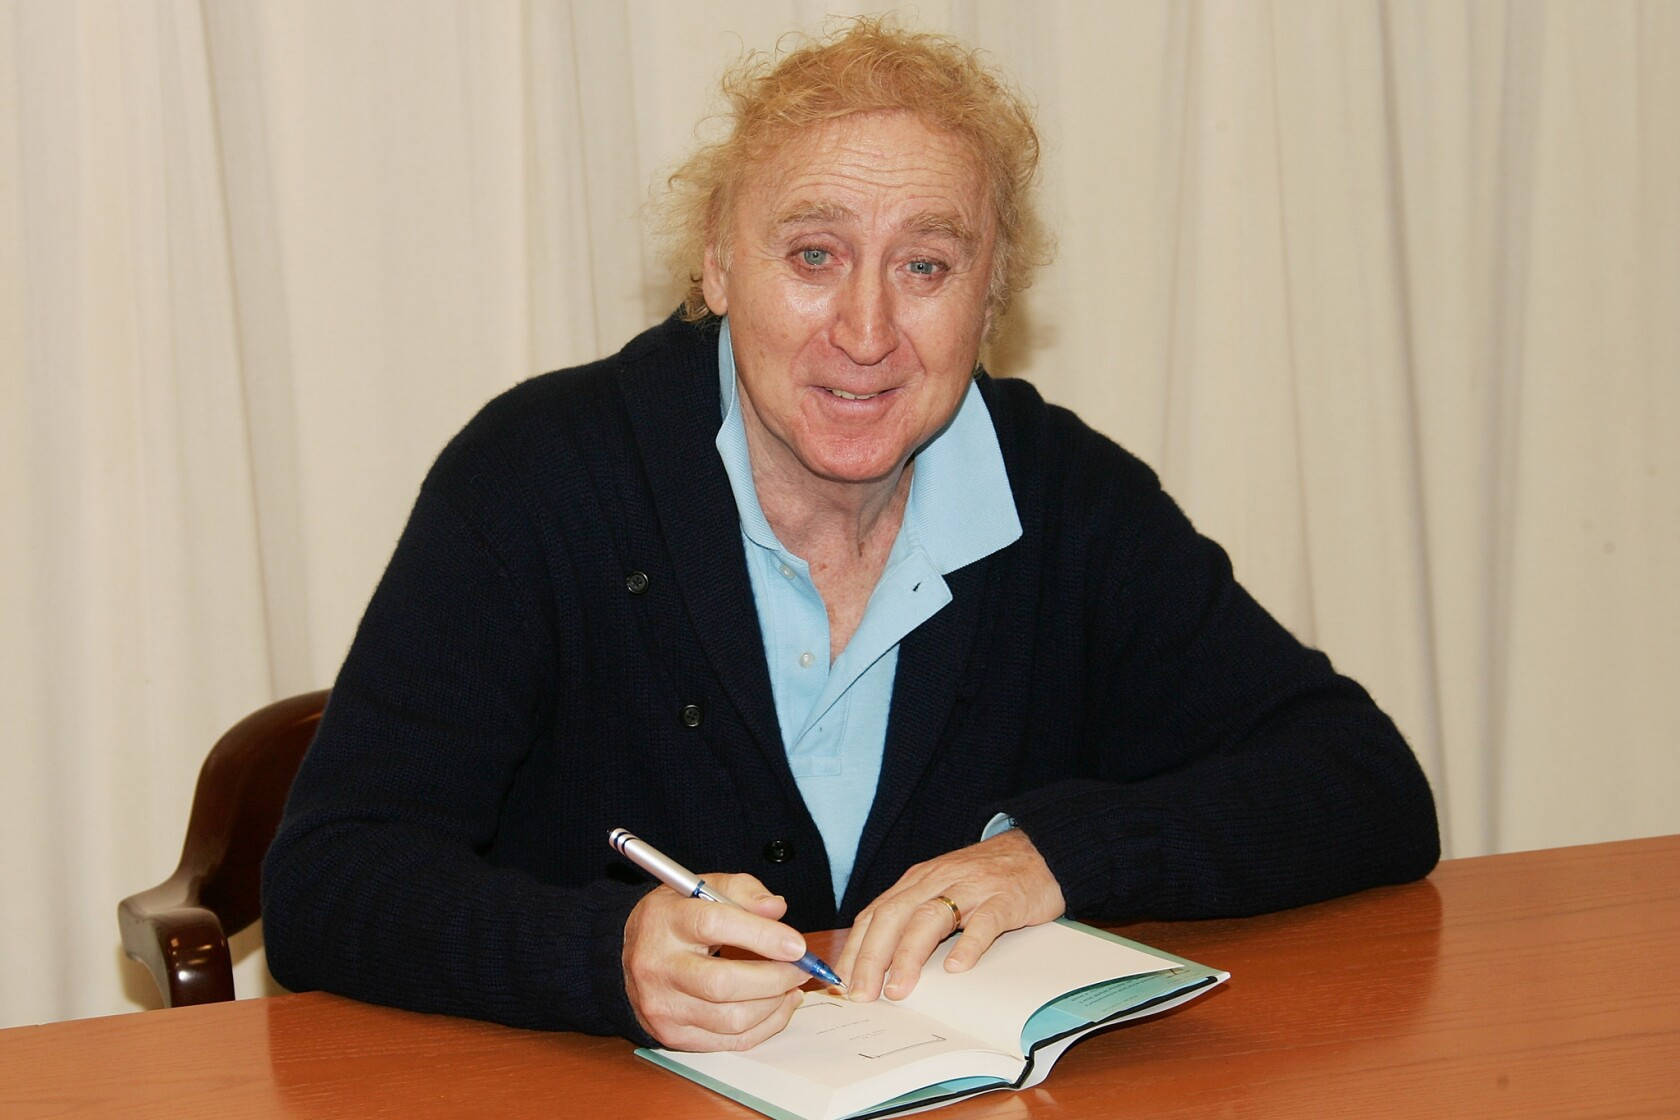 Iconic American actor and author Gene Wilder at a book signing event Wallpaper